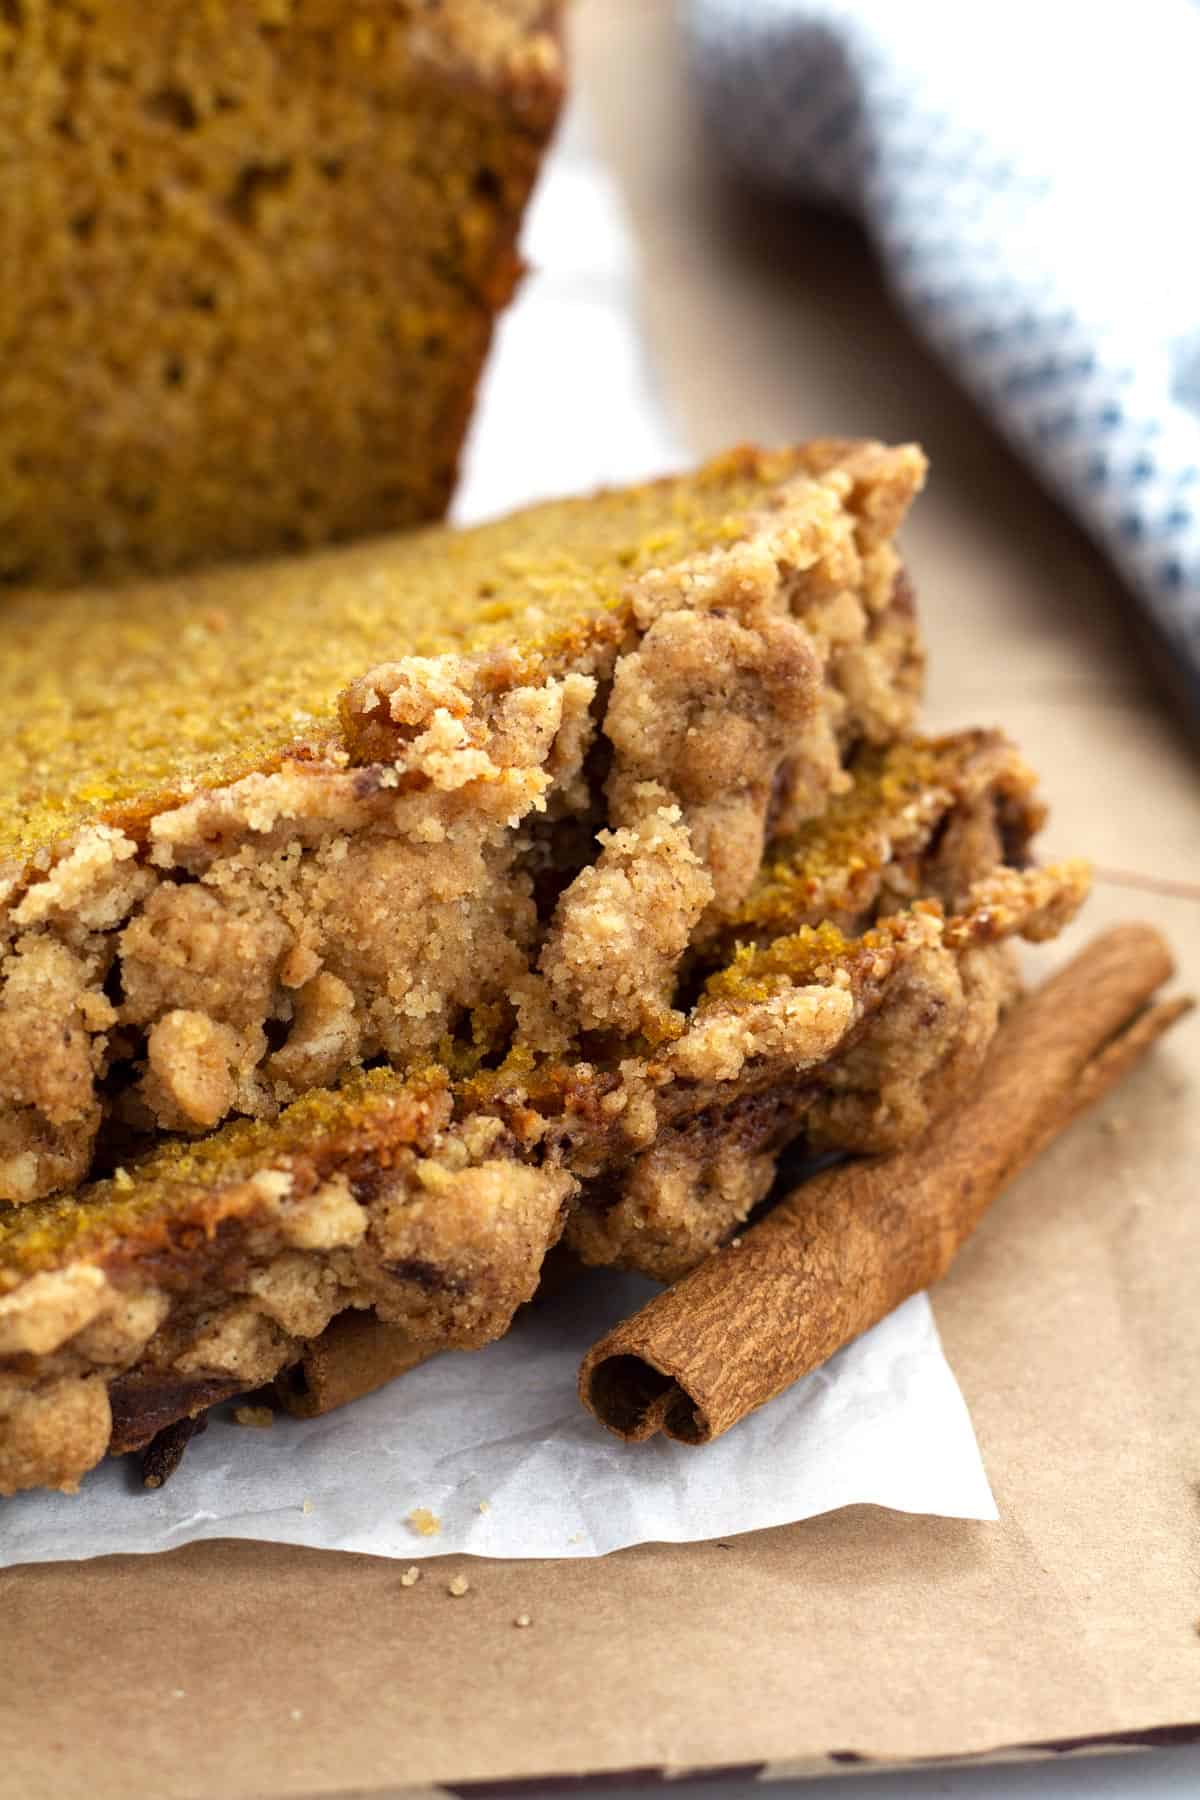 Up close view of two slices of pumpkin bread with moist crumble topping leaning on a cinnamon stick and parchment paper.